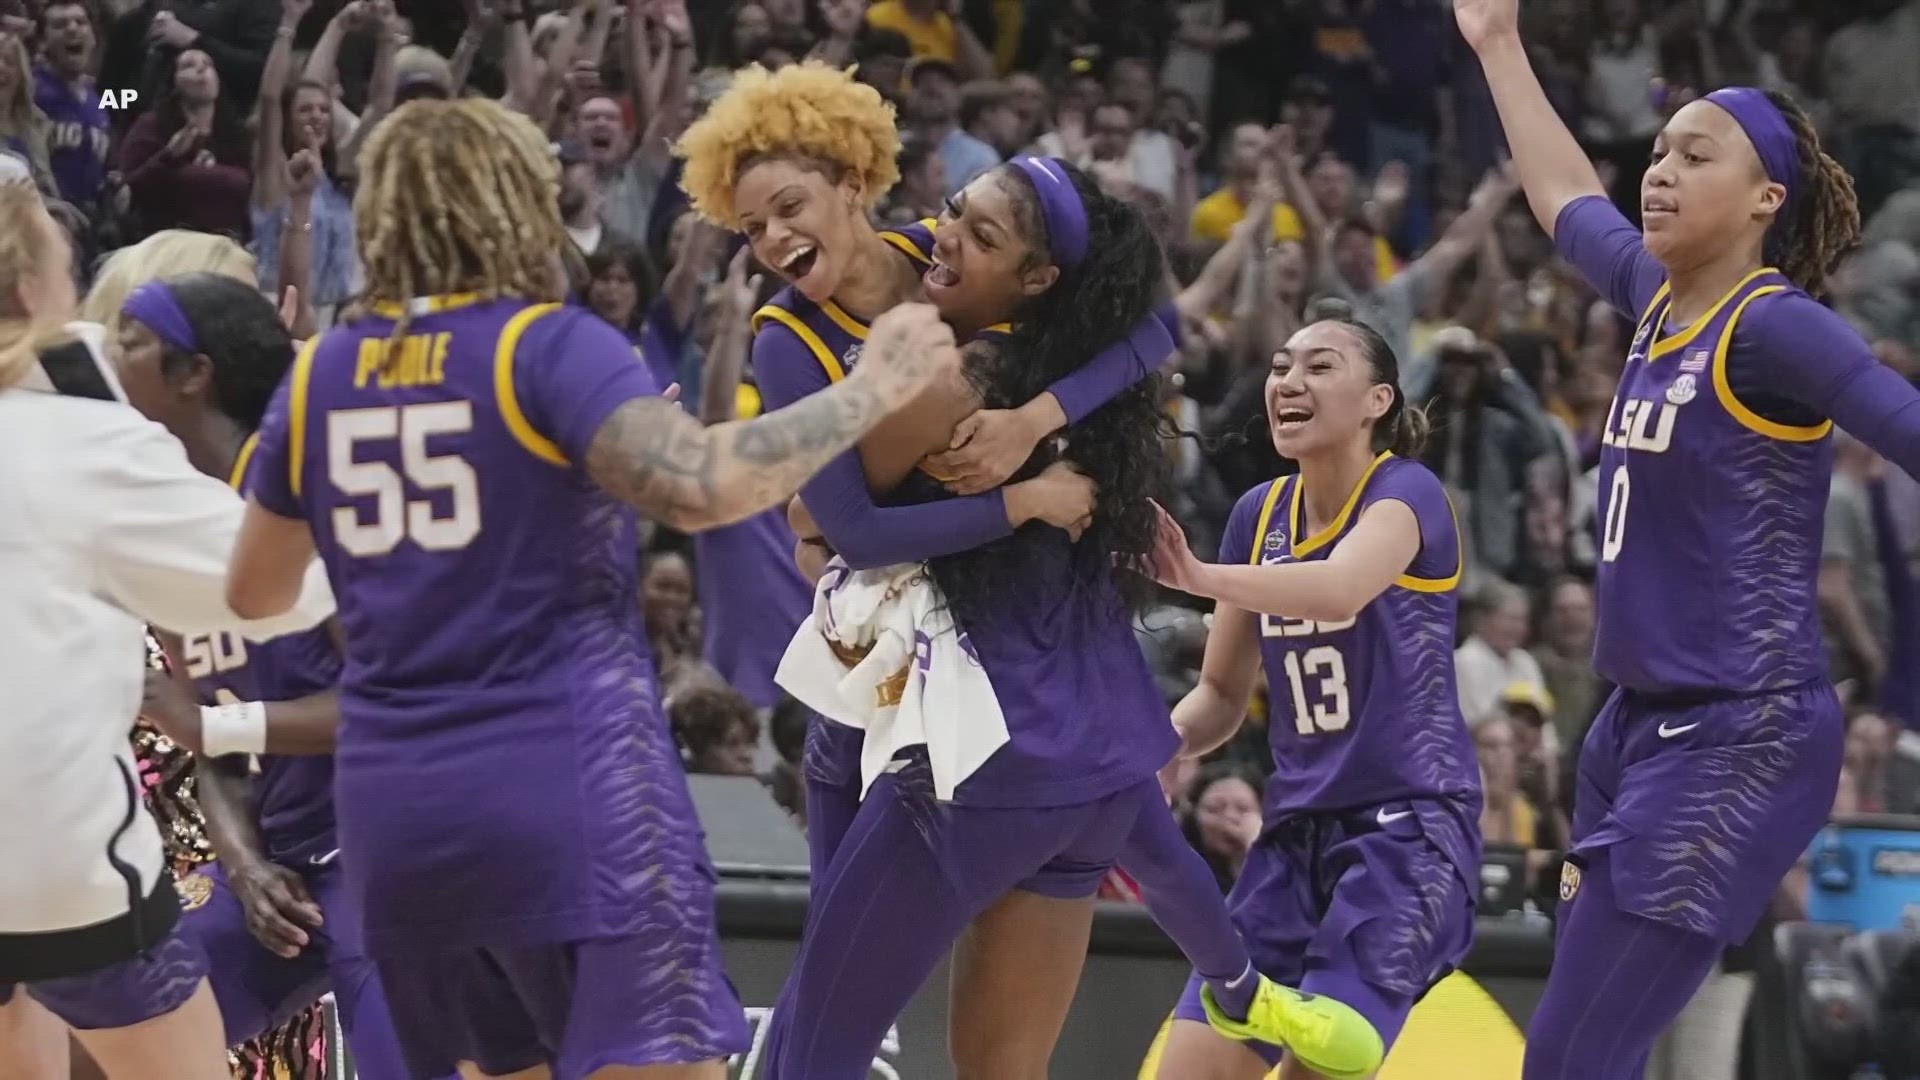 9.9 million viewers tuned in to the Women's basketball NCAA championship game. This marks the most watched college event on ESPN+, ever.